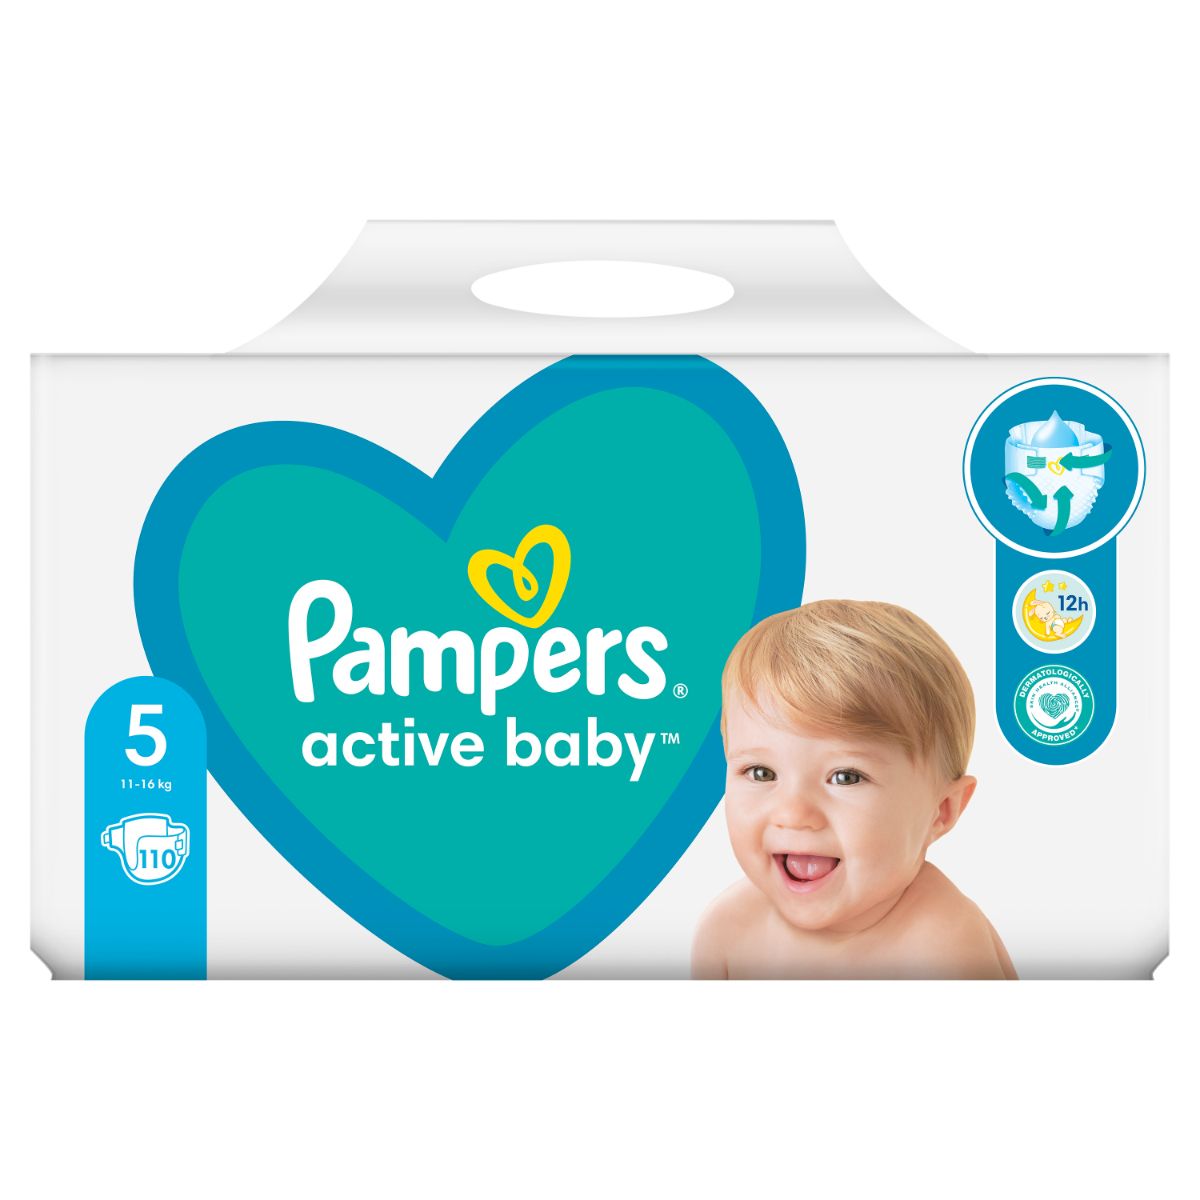 Scutece Pampers, 5 Act Baby 11-16 kg, 110 buc 11-16 imagine 2022 protejamcopilaria.ro